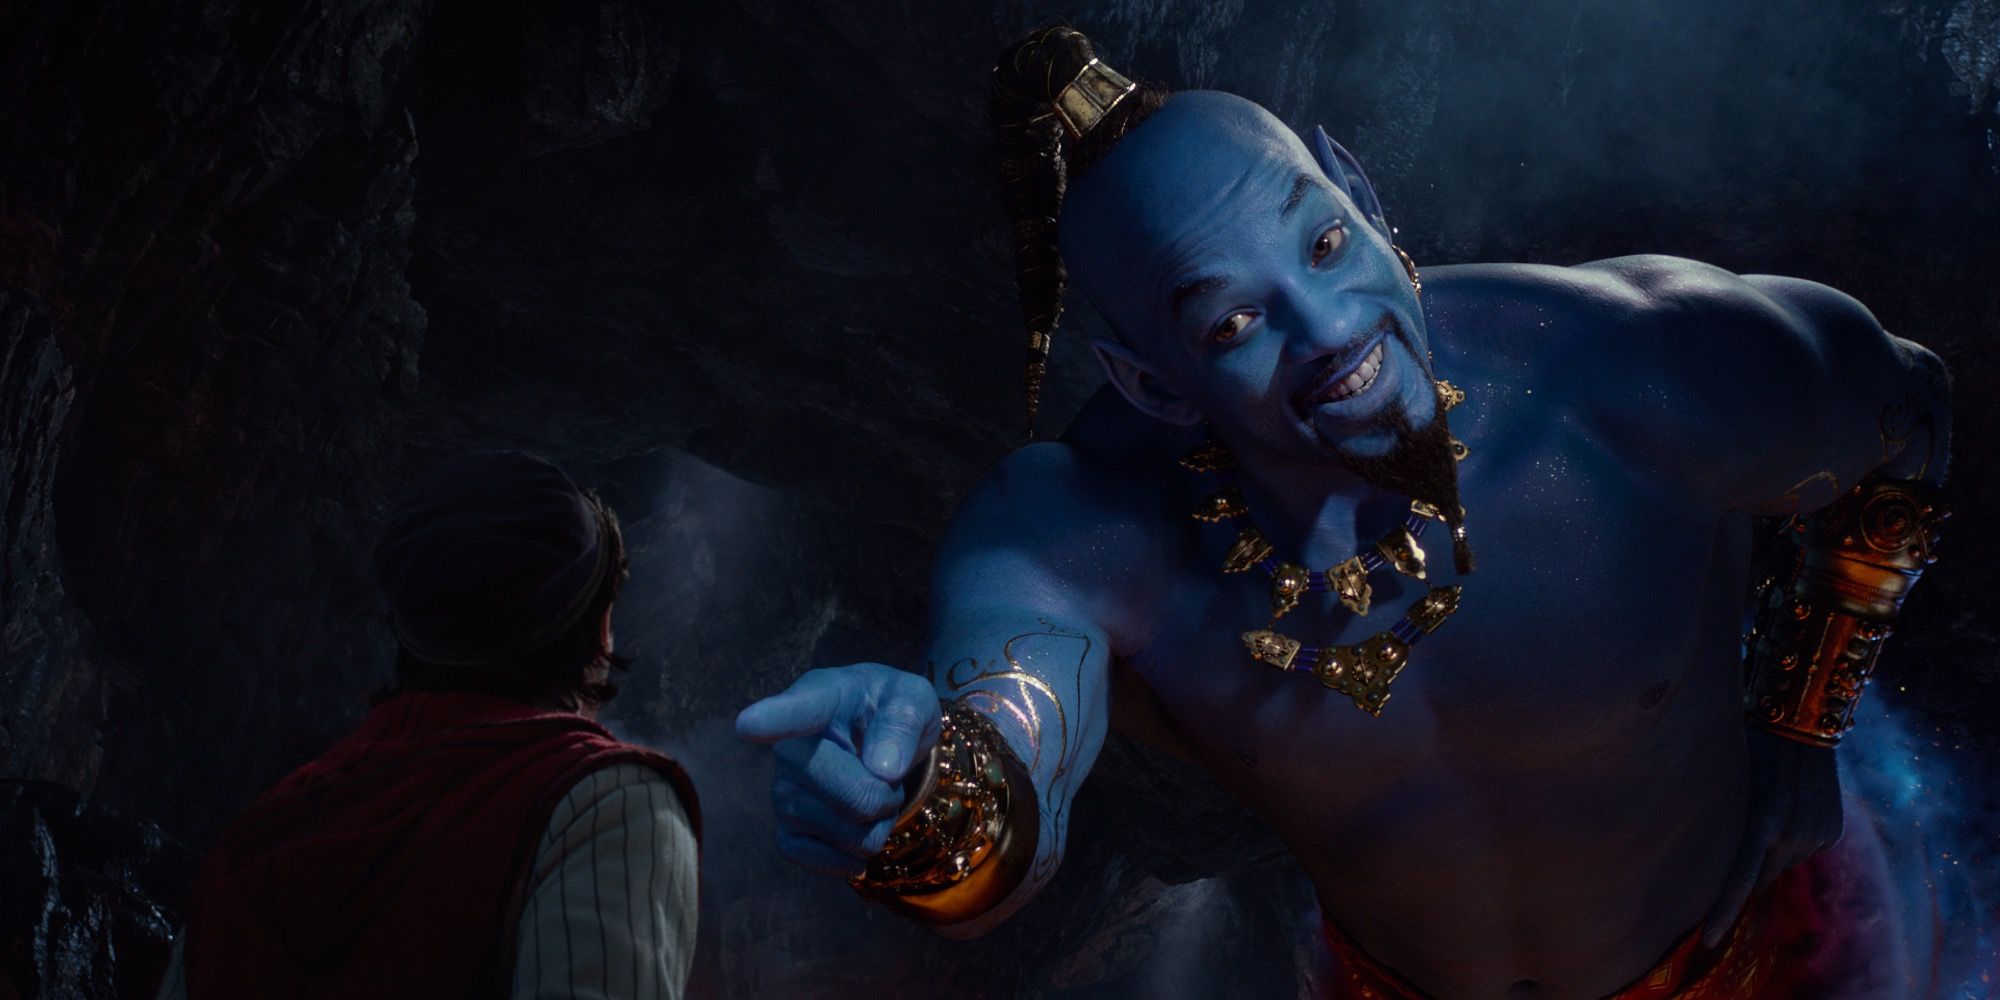 Will Smith as the Blue Genie in the live-action Aladdin Movie